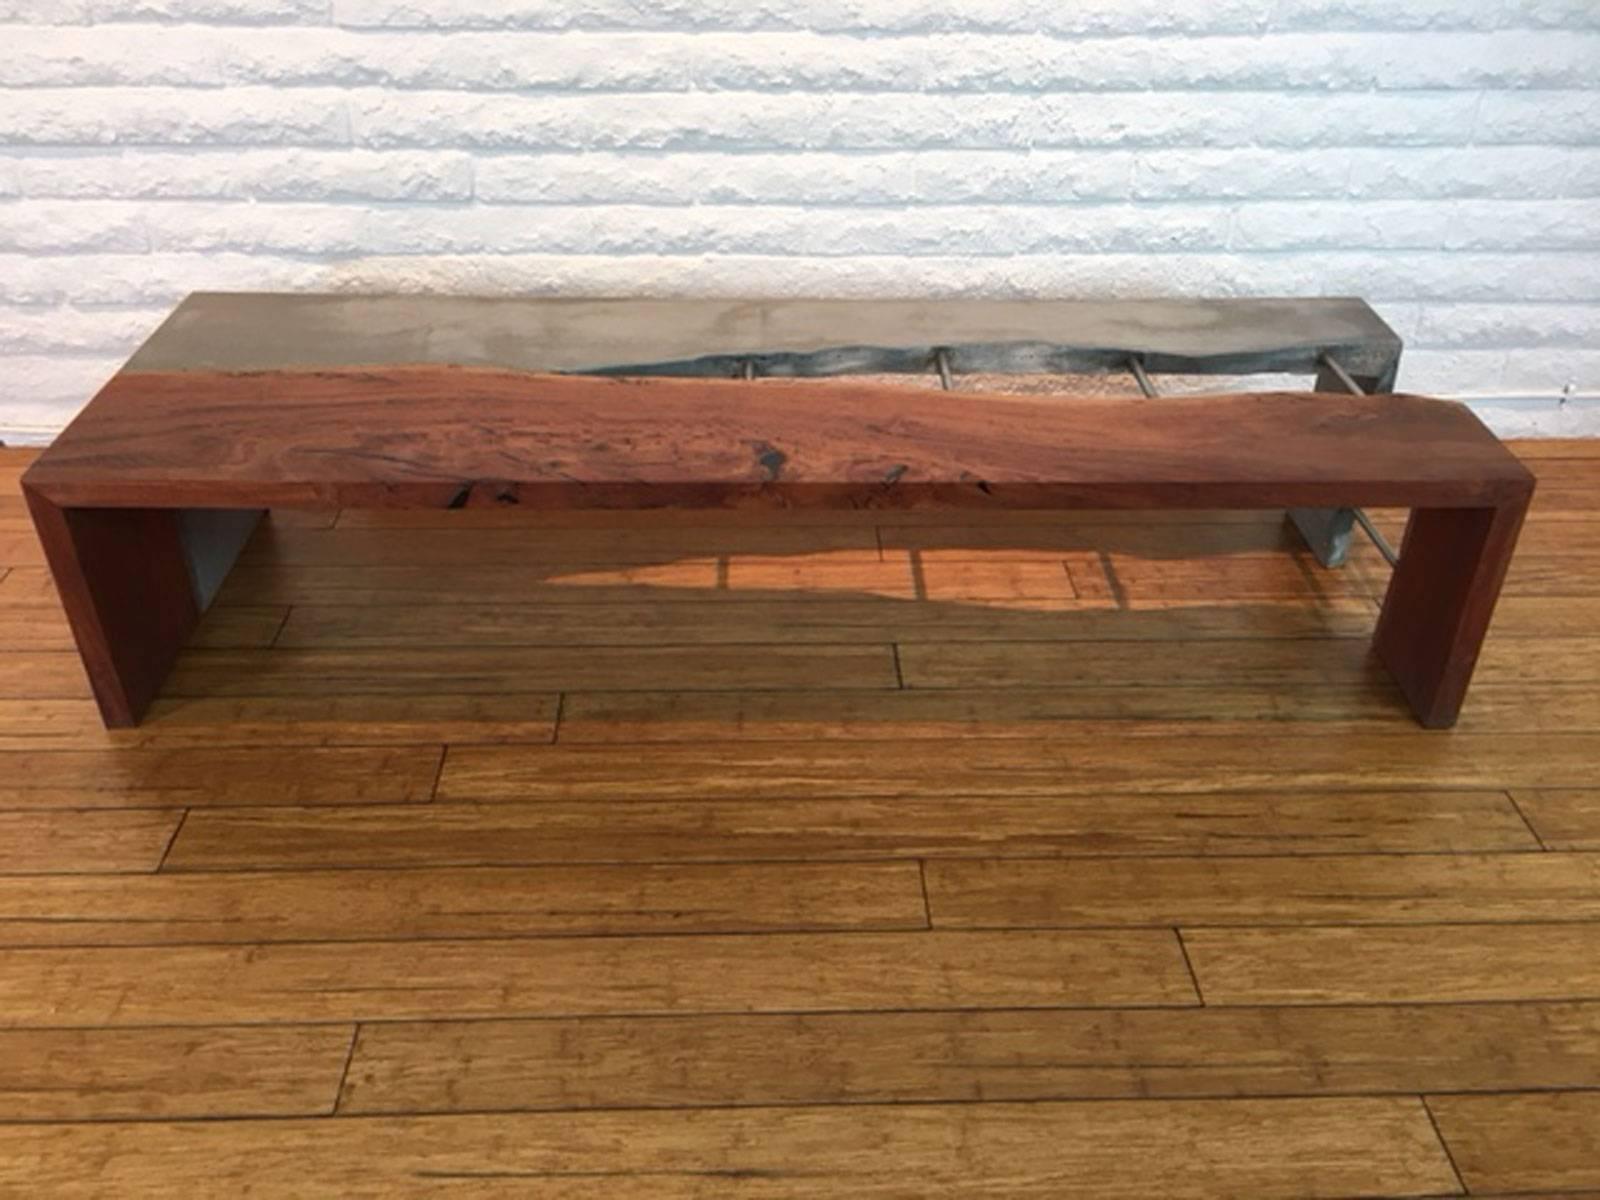 Concrete, steel bar, and eucalyptus wood bench designed, produced, and made by master wood artist and designer Scott Mills who only uses reclaimed (deadfall or storm downed trees) in the pieces he designers and produces. This piece is big, solid,